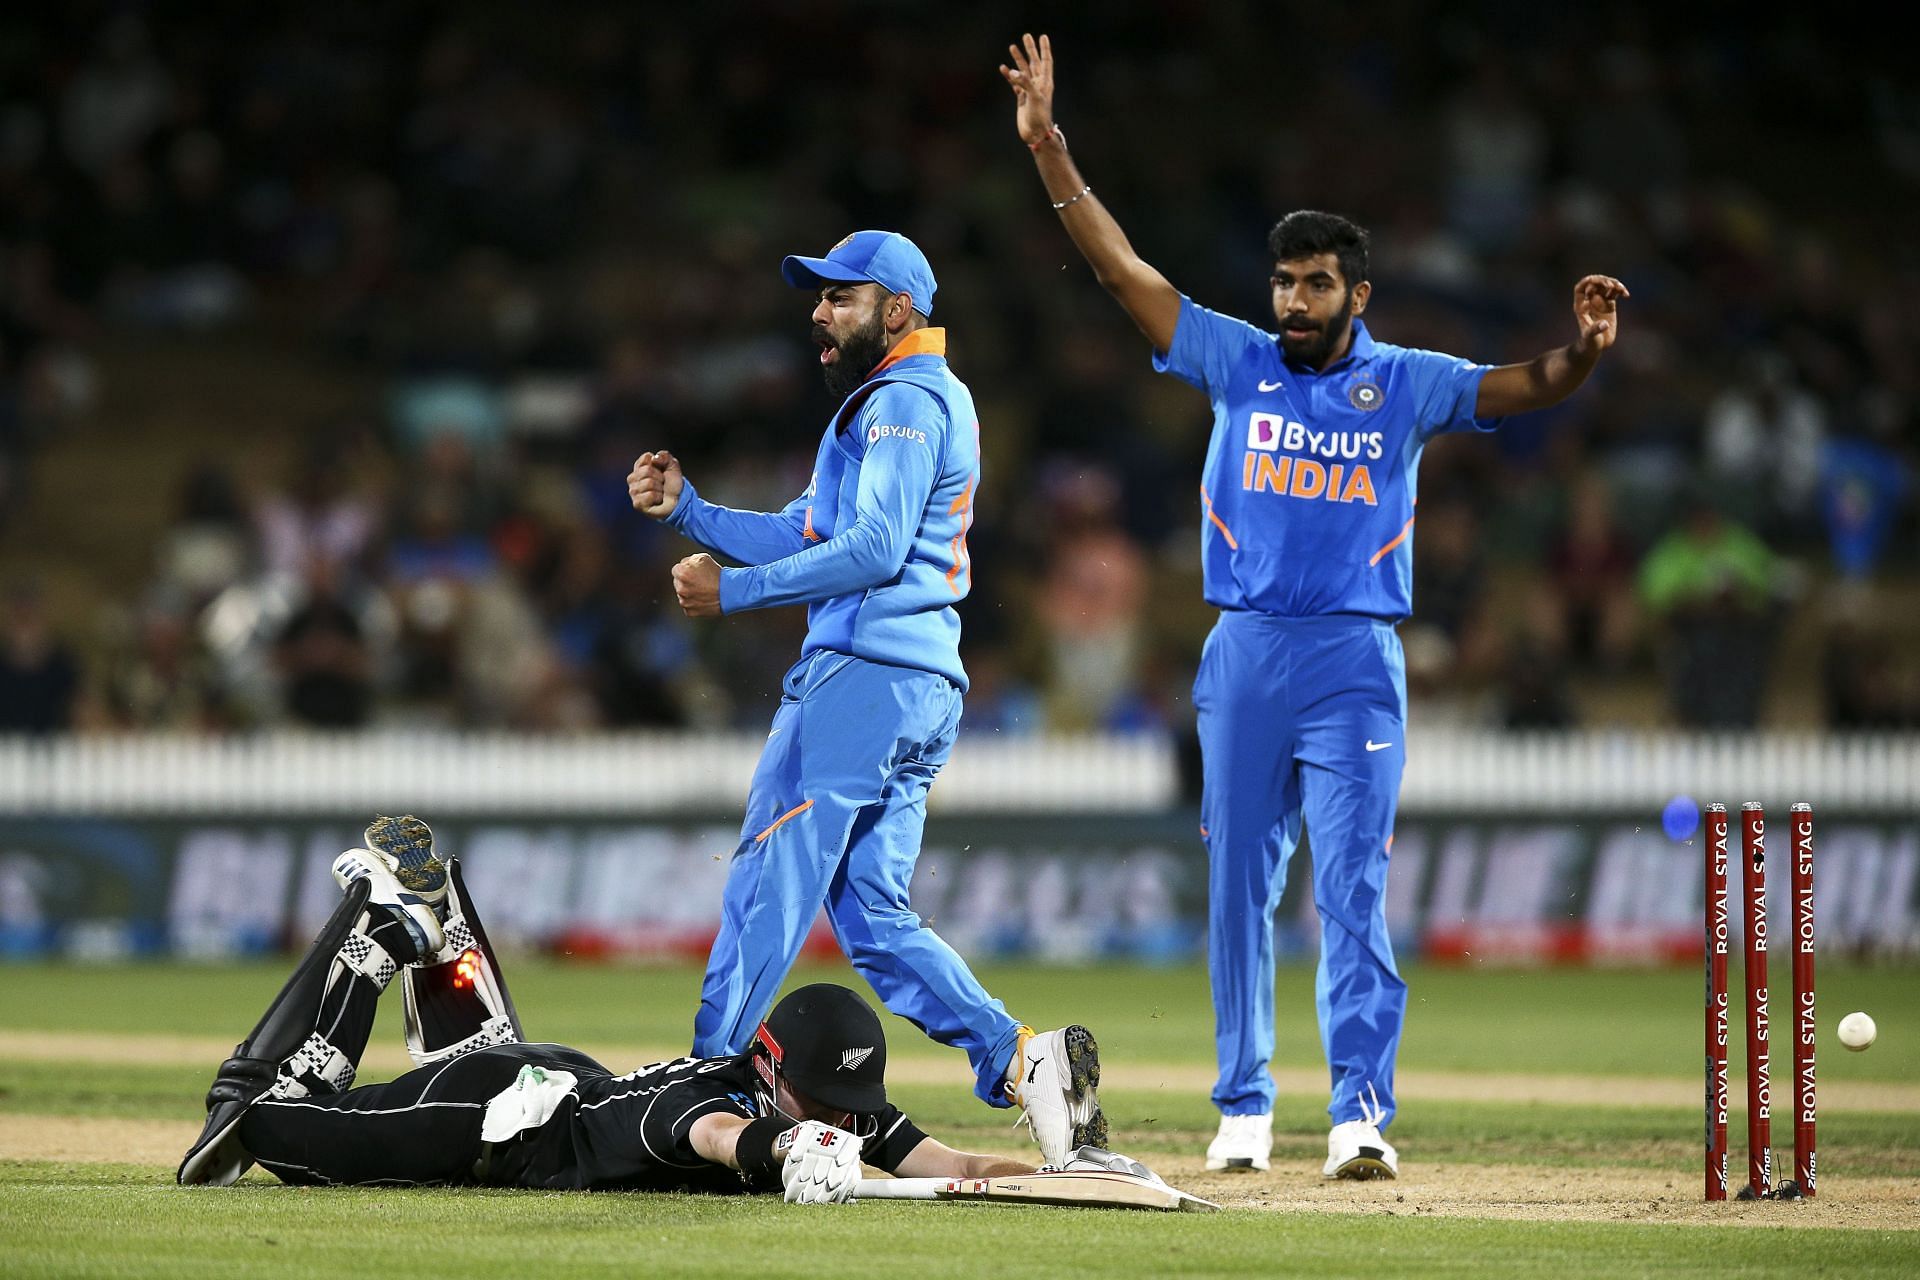 Jasprit Bumrah has a fantastic record in T20I matches against New Zealand